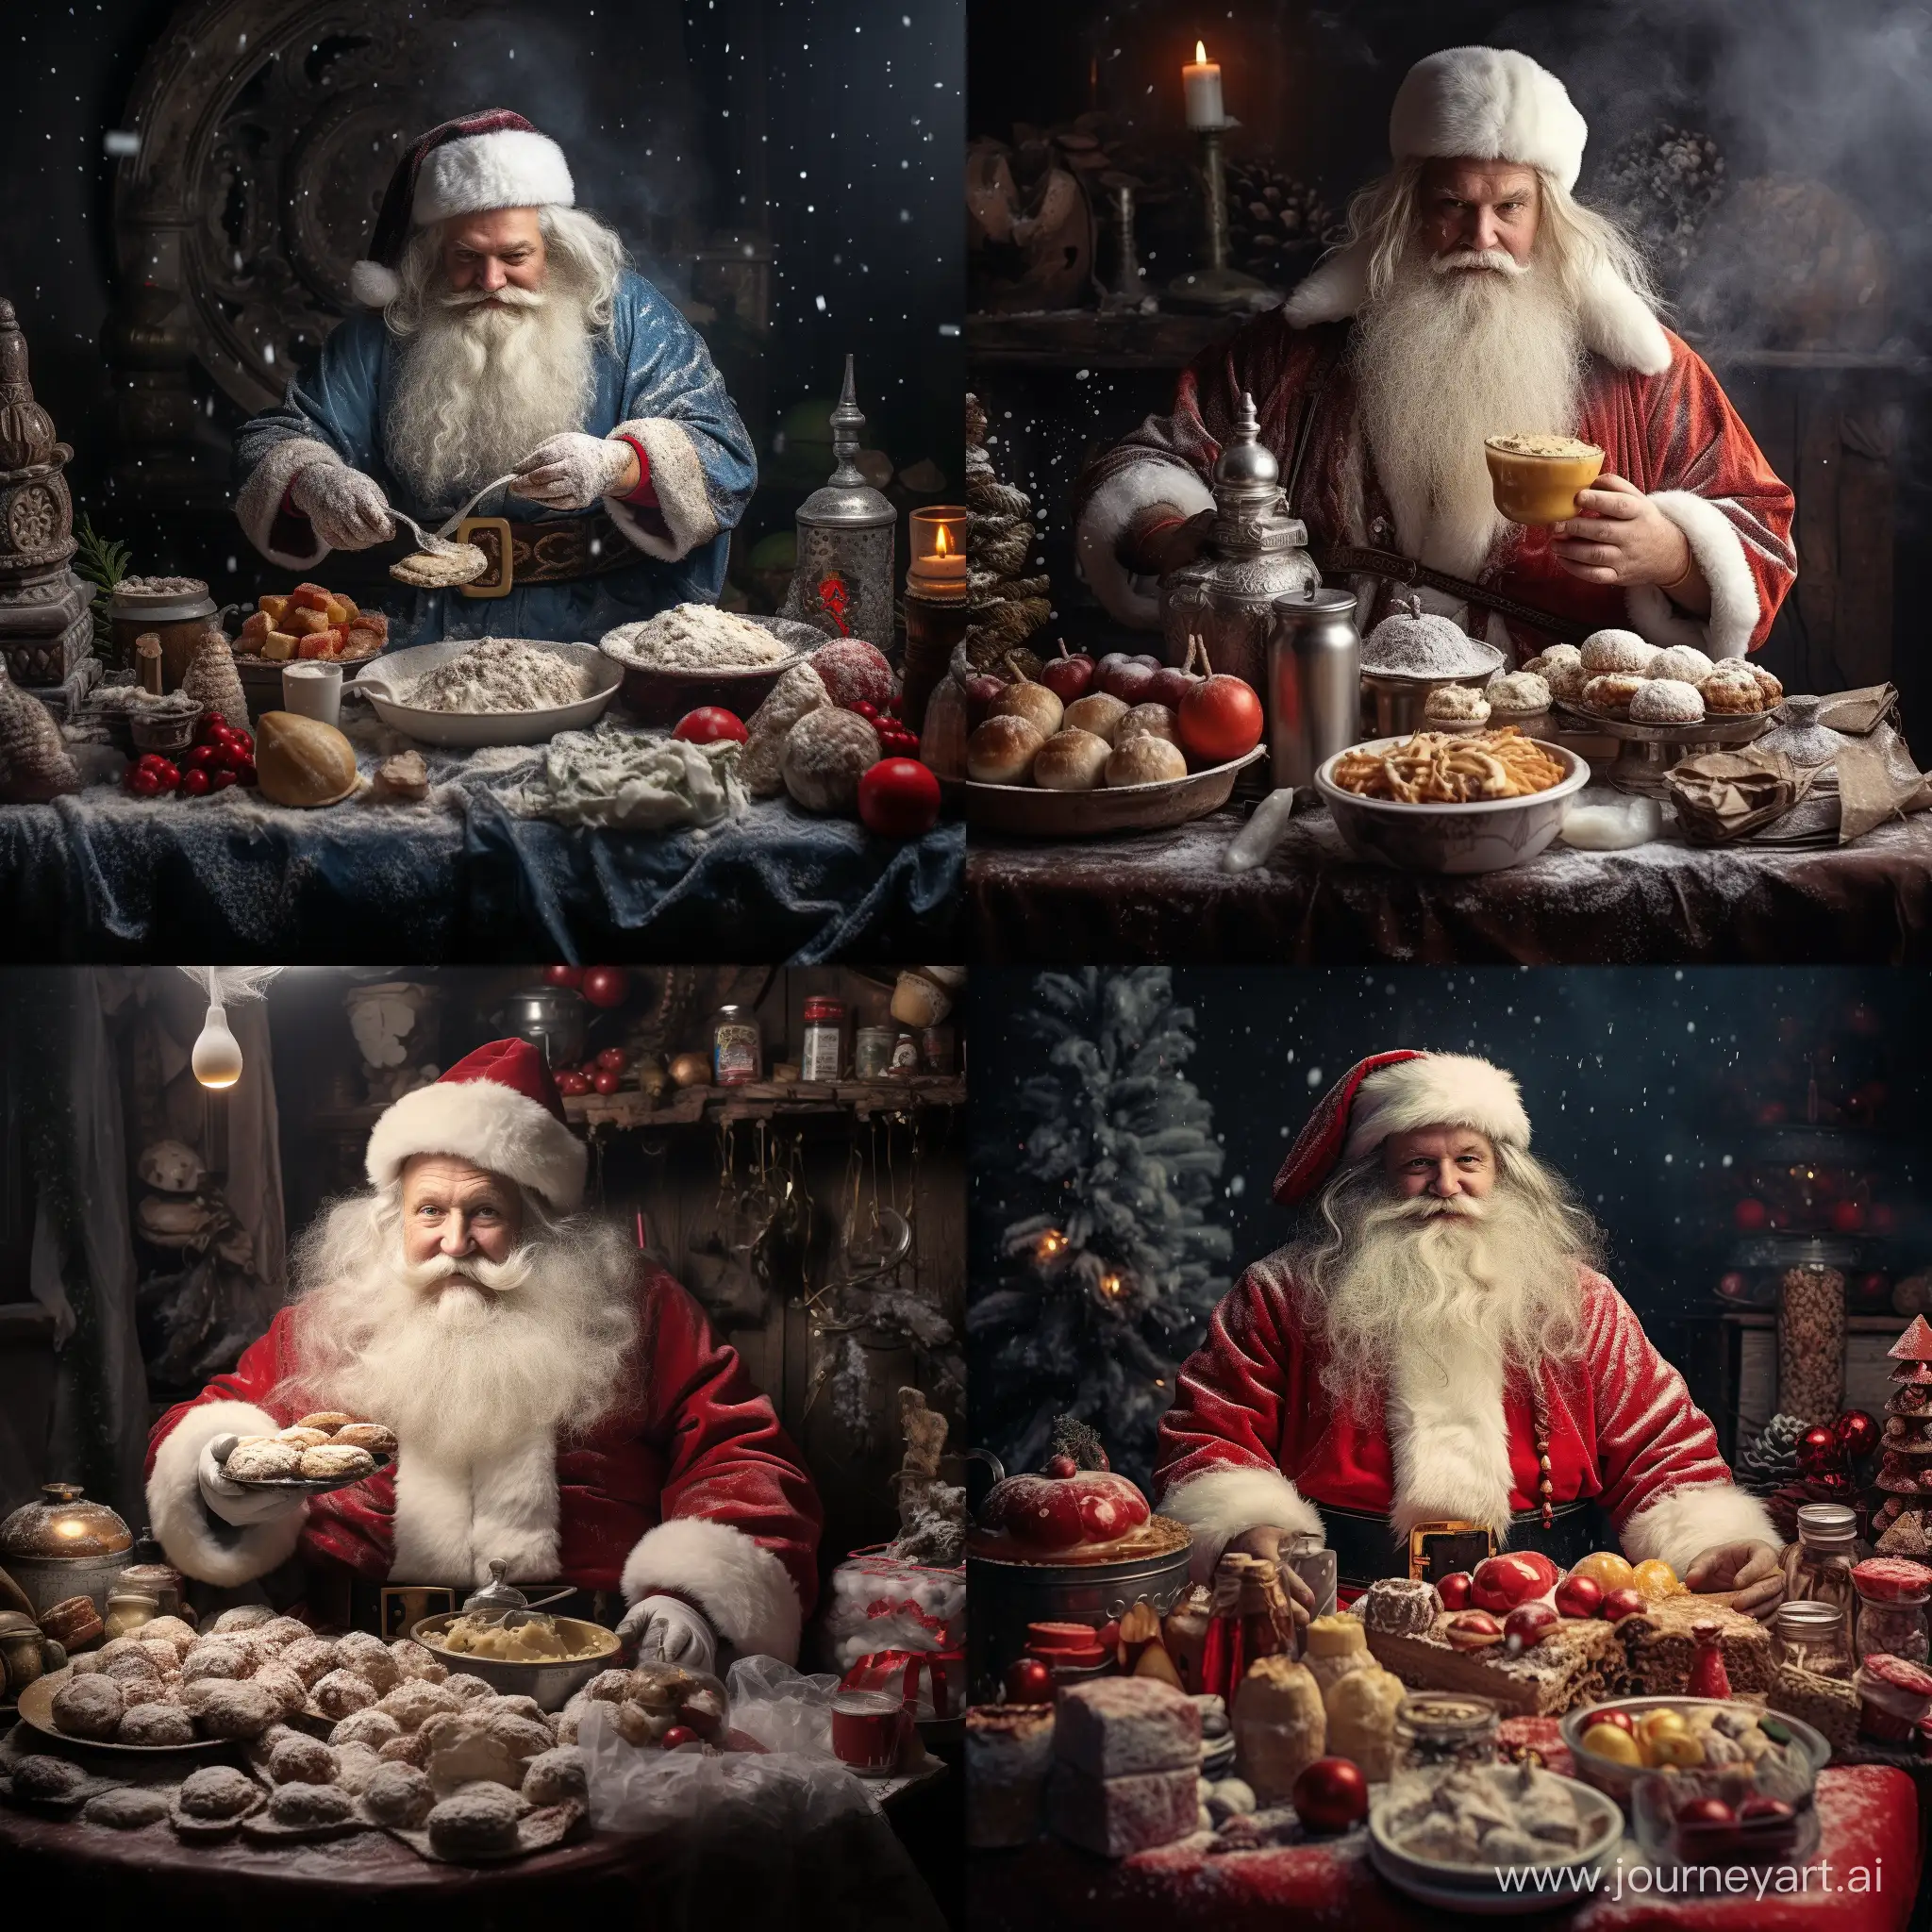 Ded-Moroz-Food-Delivery-Enchanting-AR-Experience-with-a-11-Aspect-Ratio-Order-2810